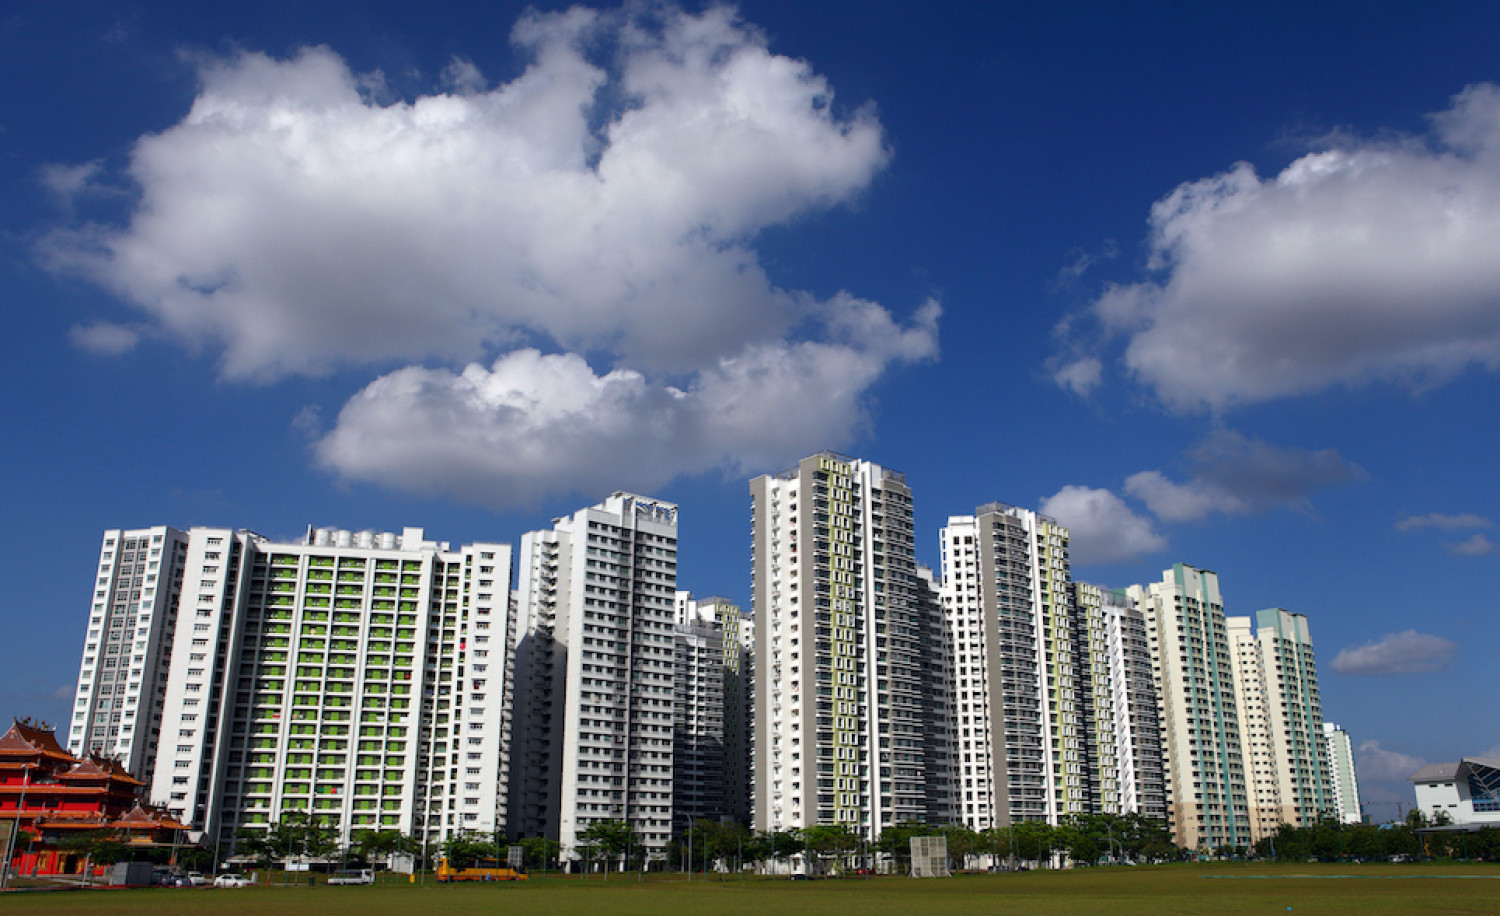 HDB towns that buck the price trend - Property News